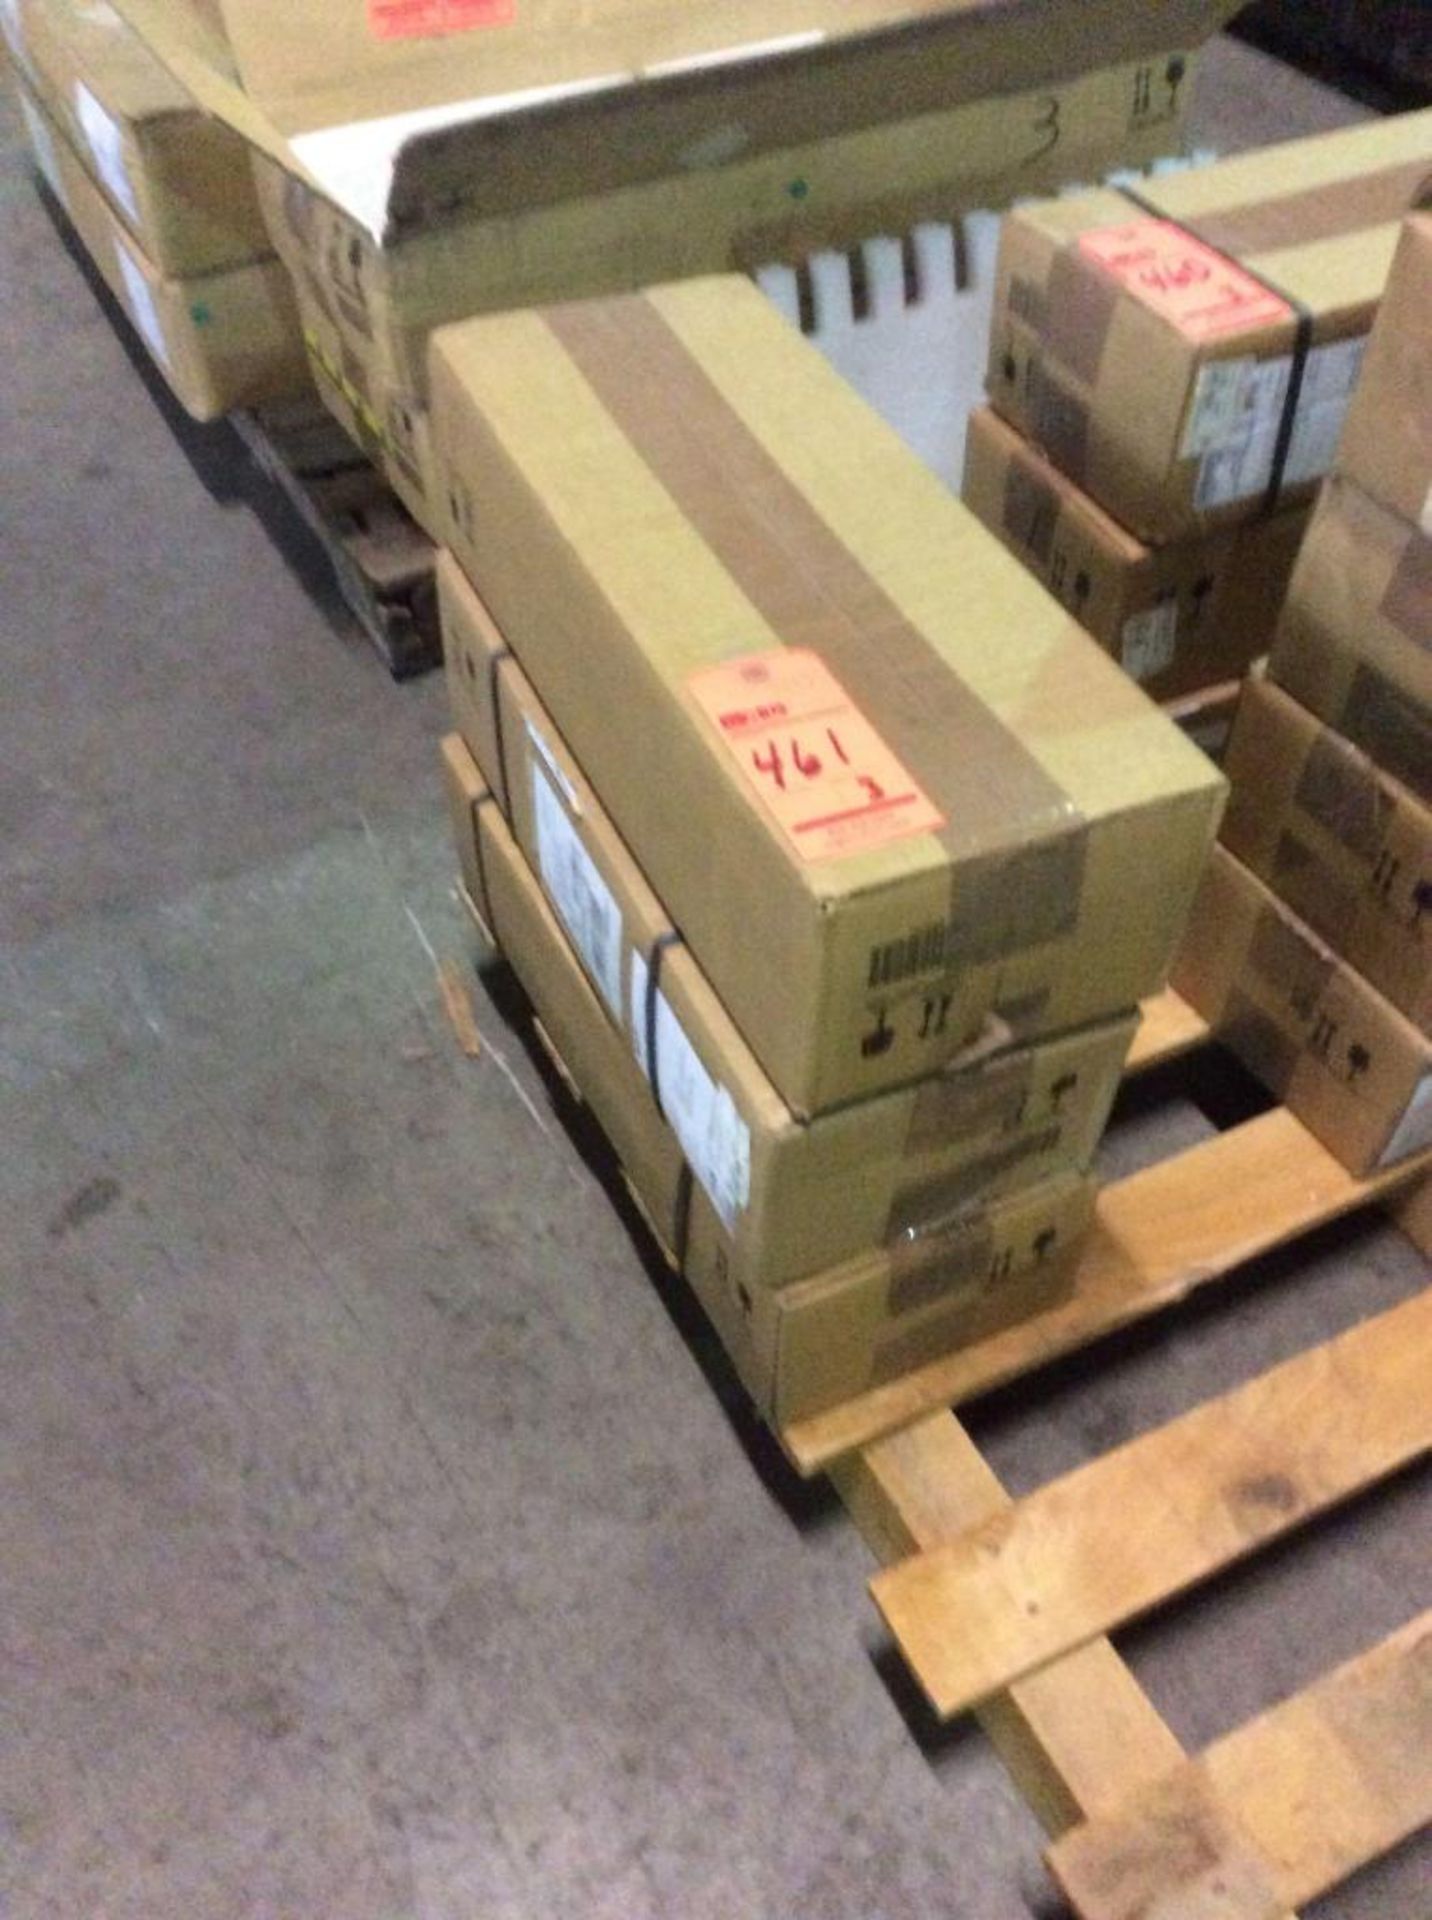 Lot of (3) VAT 2 1/2" stainless steel gate valves, mn 10836-PE44-0005 (NEW IN BOXES) - Image 2 of 2